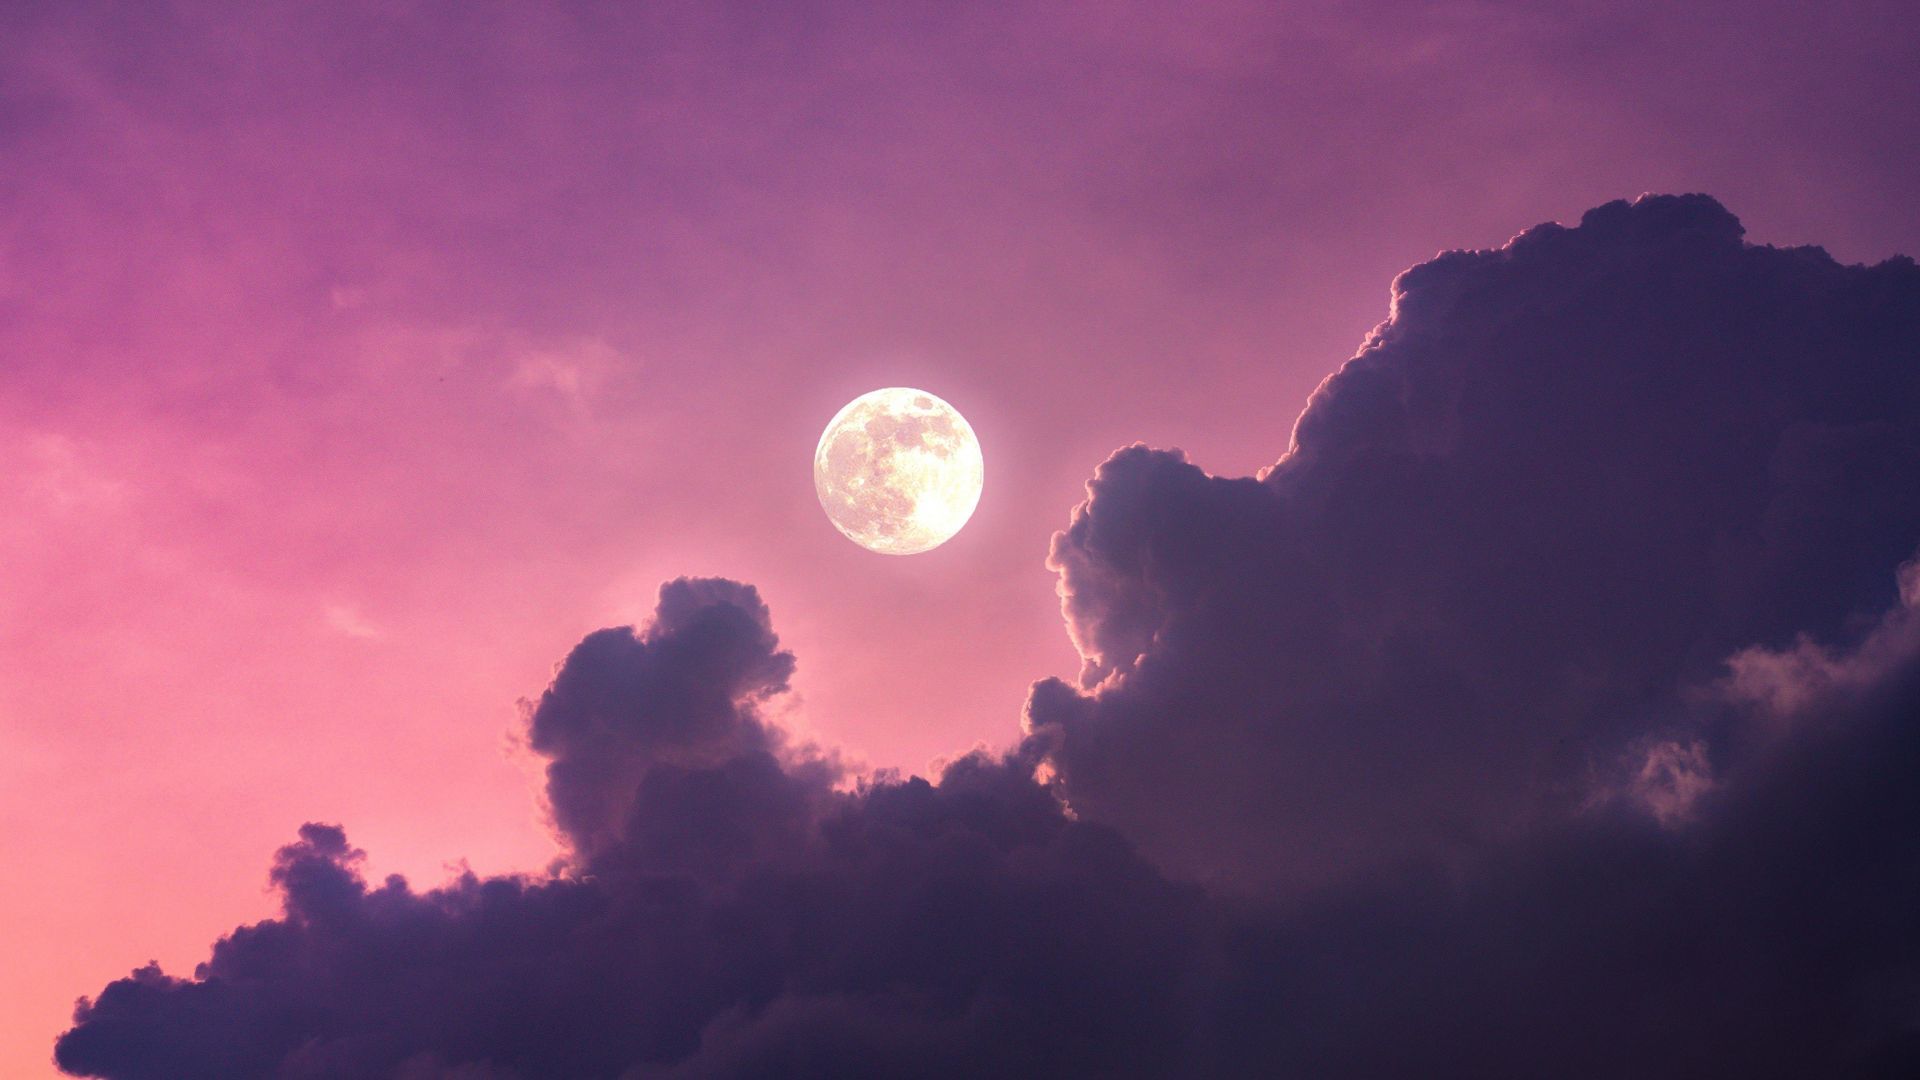 Desktop wallpaper clouds and moon light, sky, nature, HD image, picture, background, bfed98